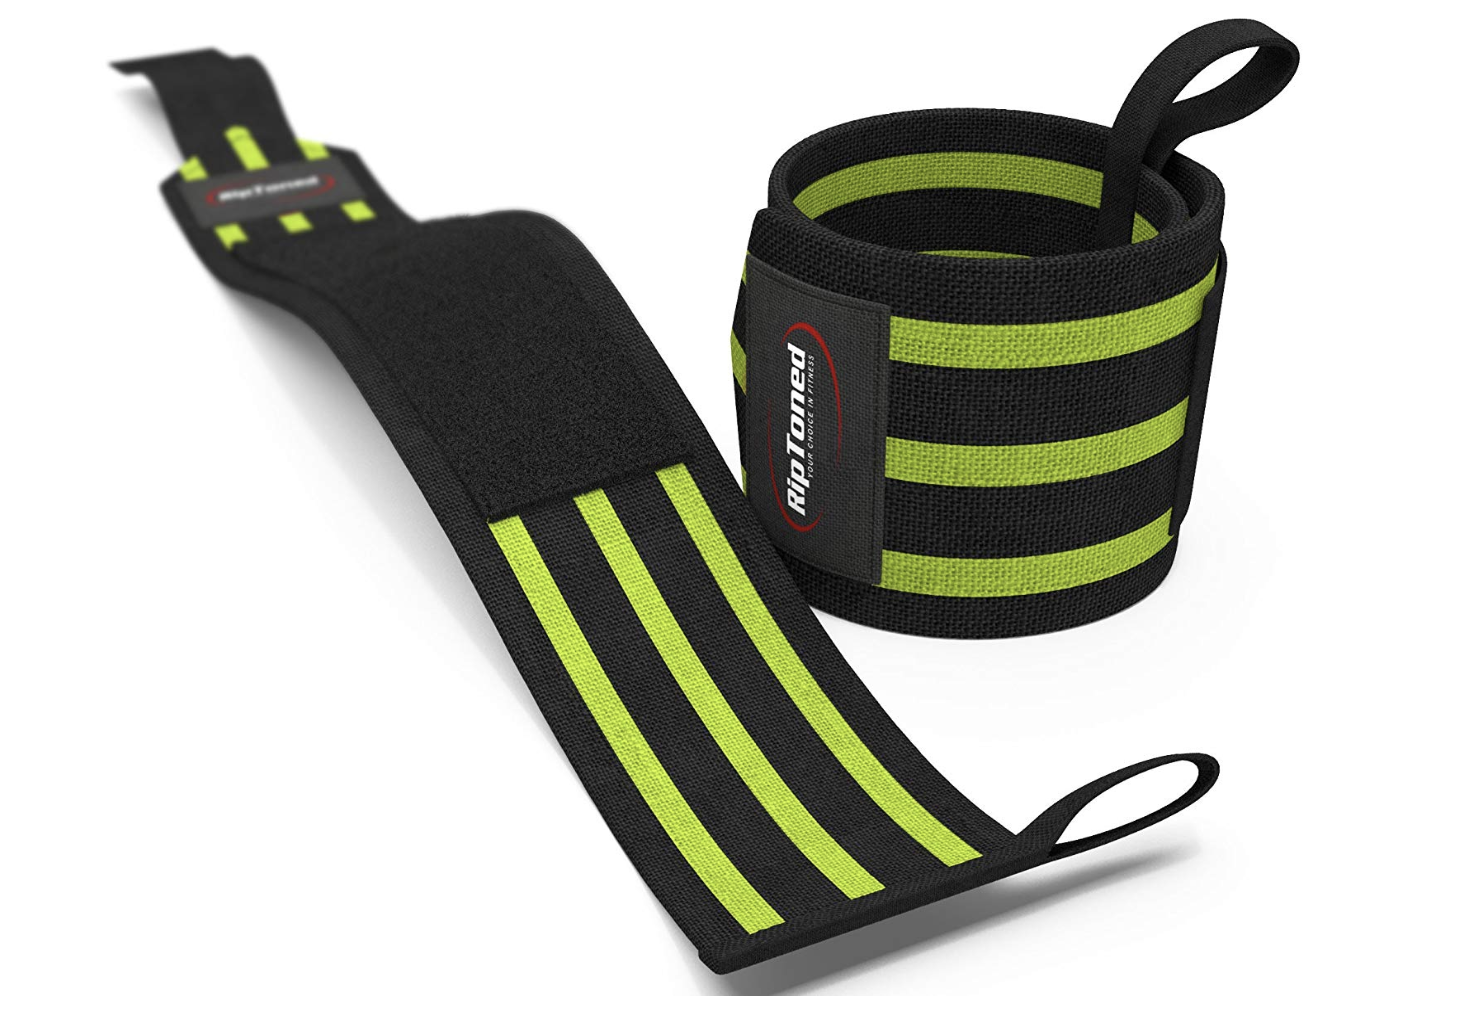 Wrist straps can prevent injury when lifting weight (Amazon)